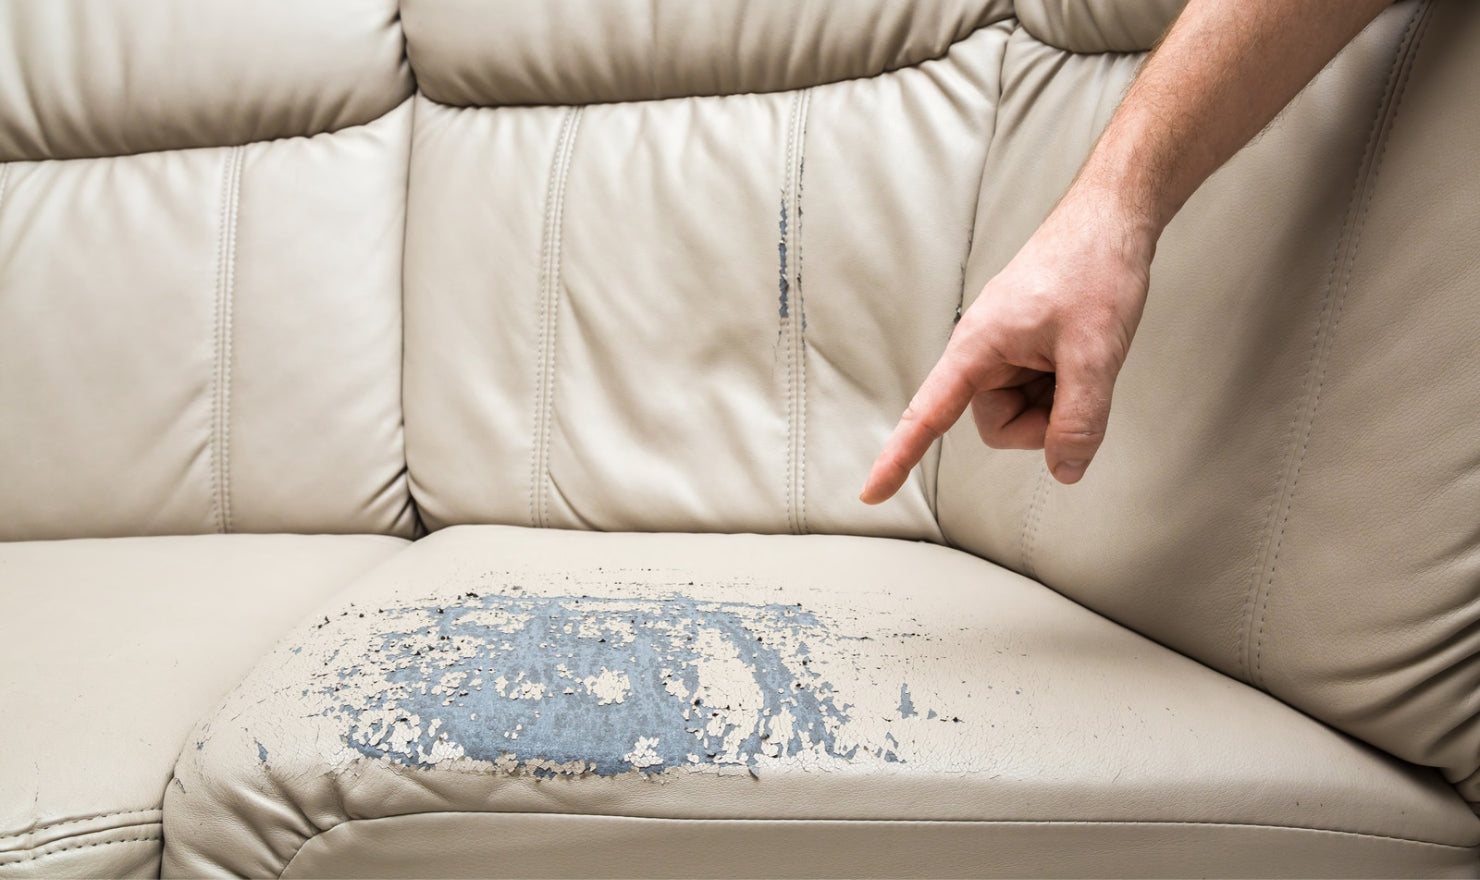 What Issues Can Pop Up If the Sofa Bed Lacks Maintenance